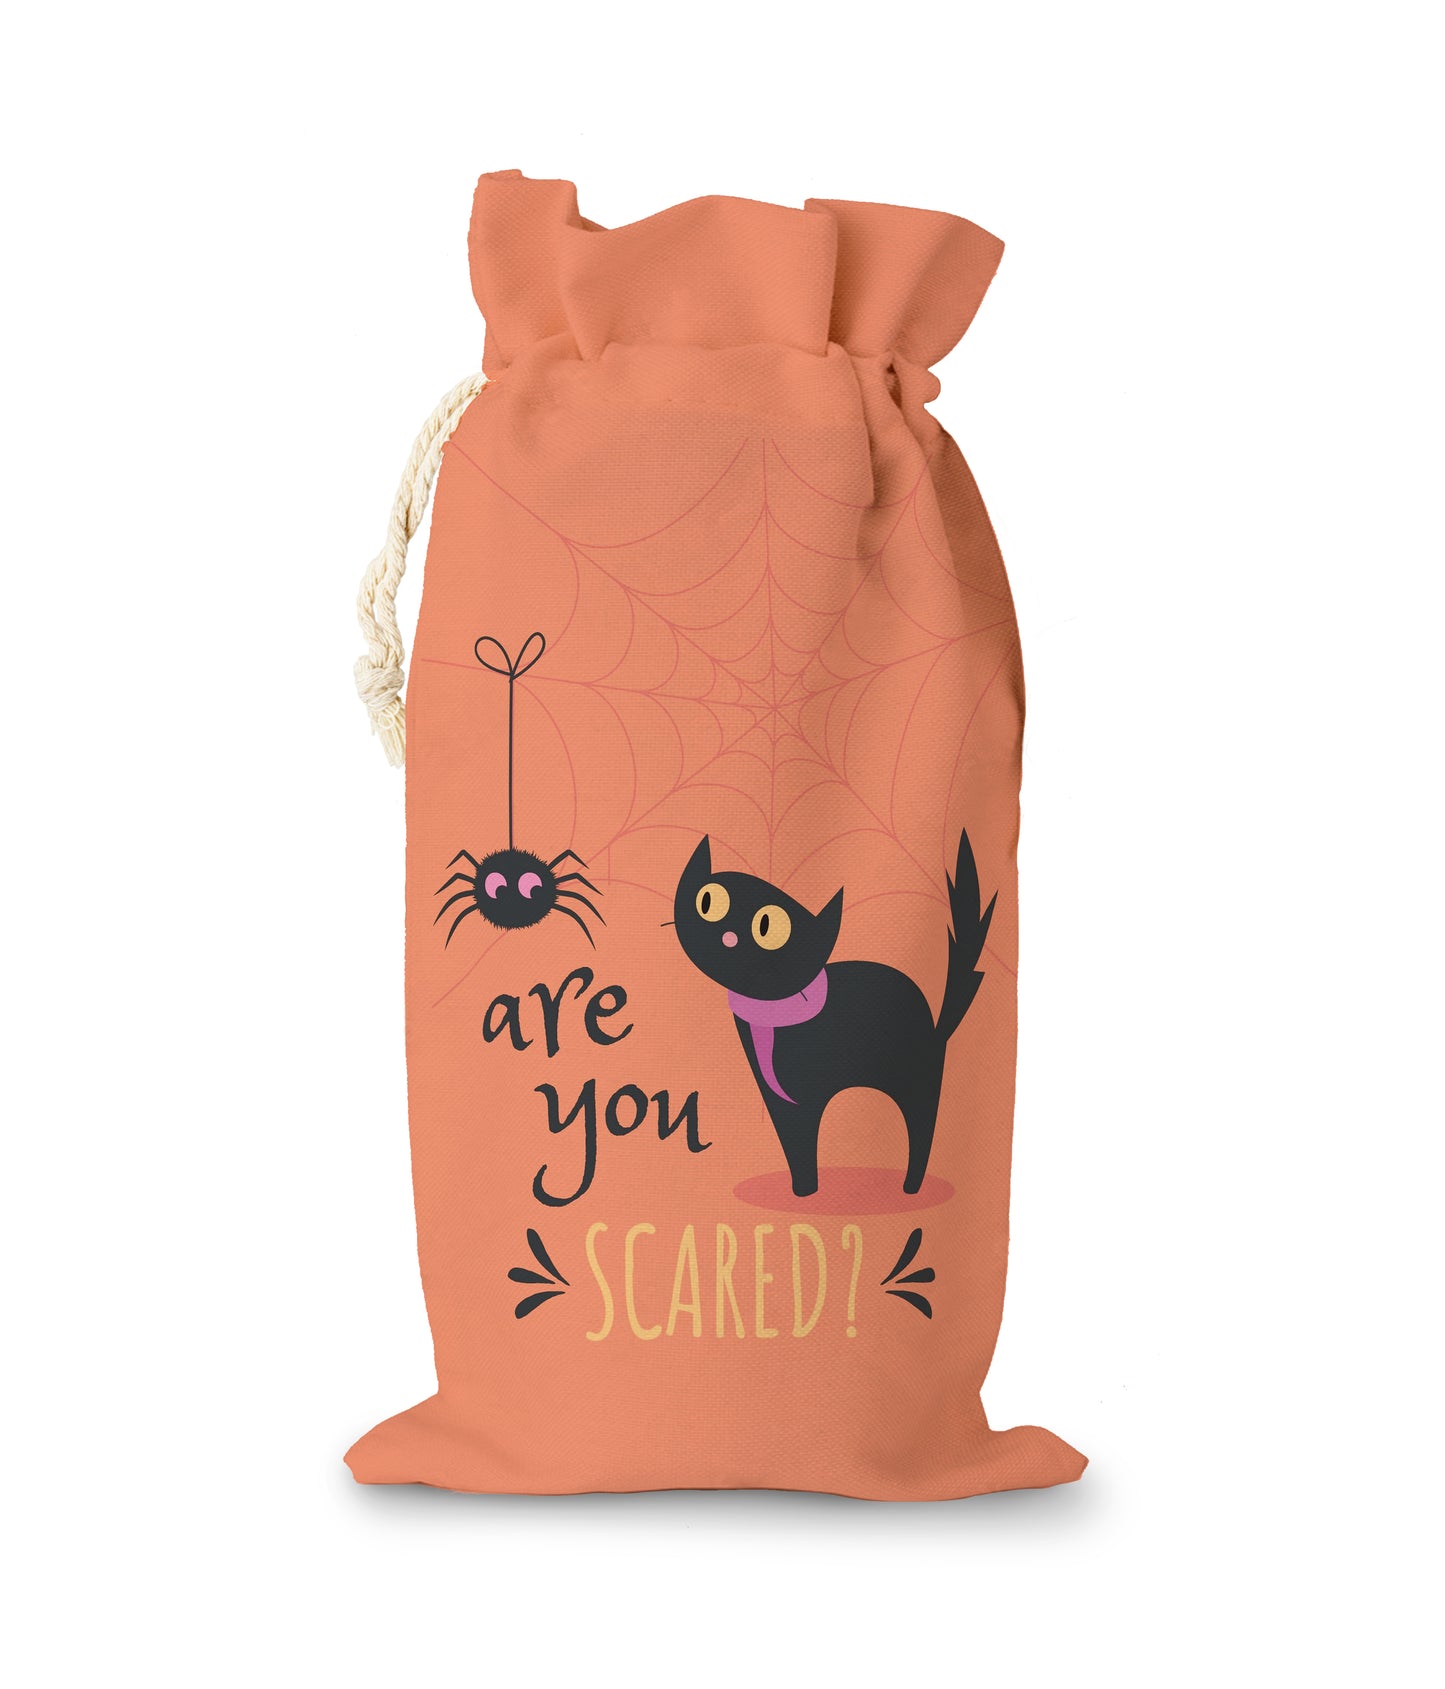 Compactable Spider And Cat Halloween Sack Orange Background. Text "are toy SCARED?"